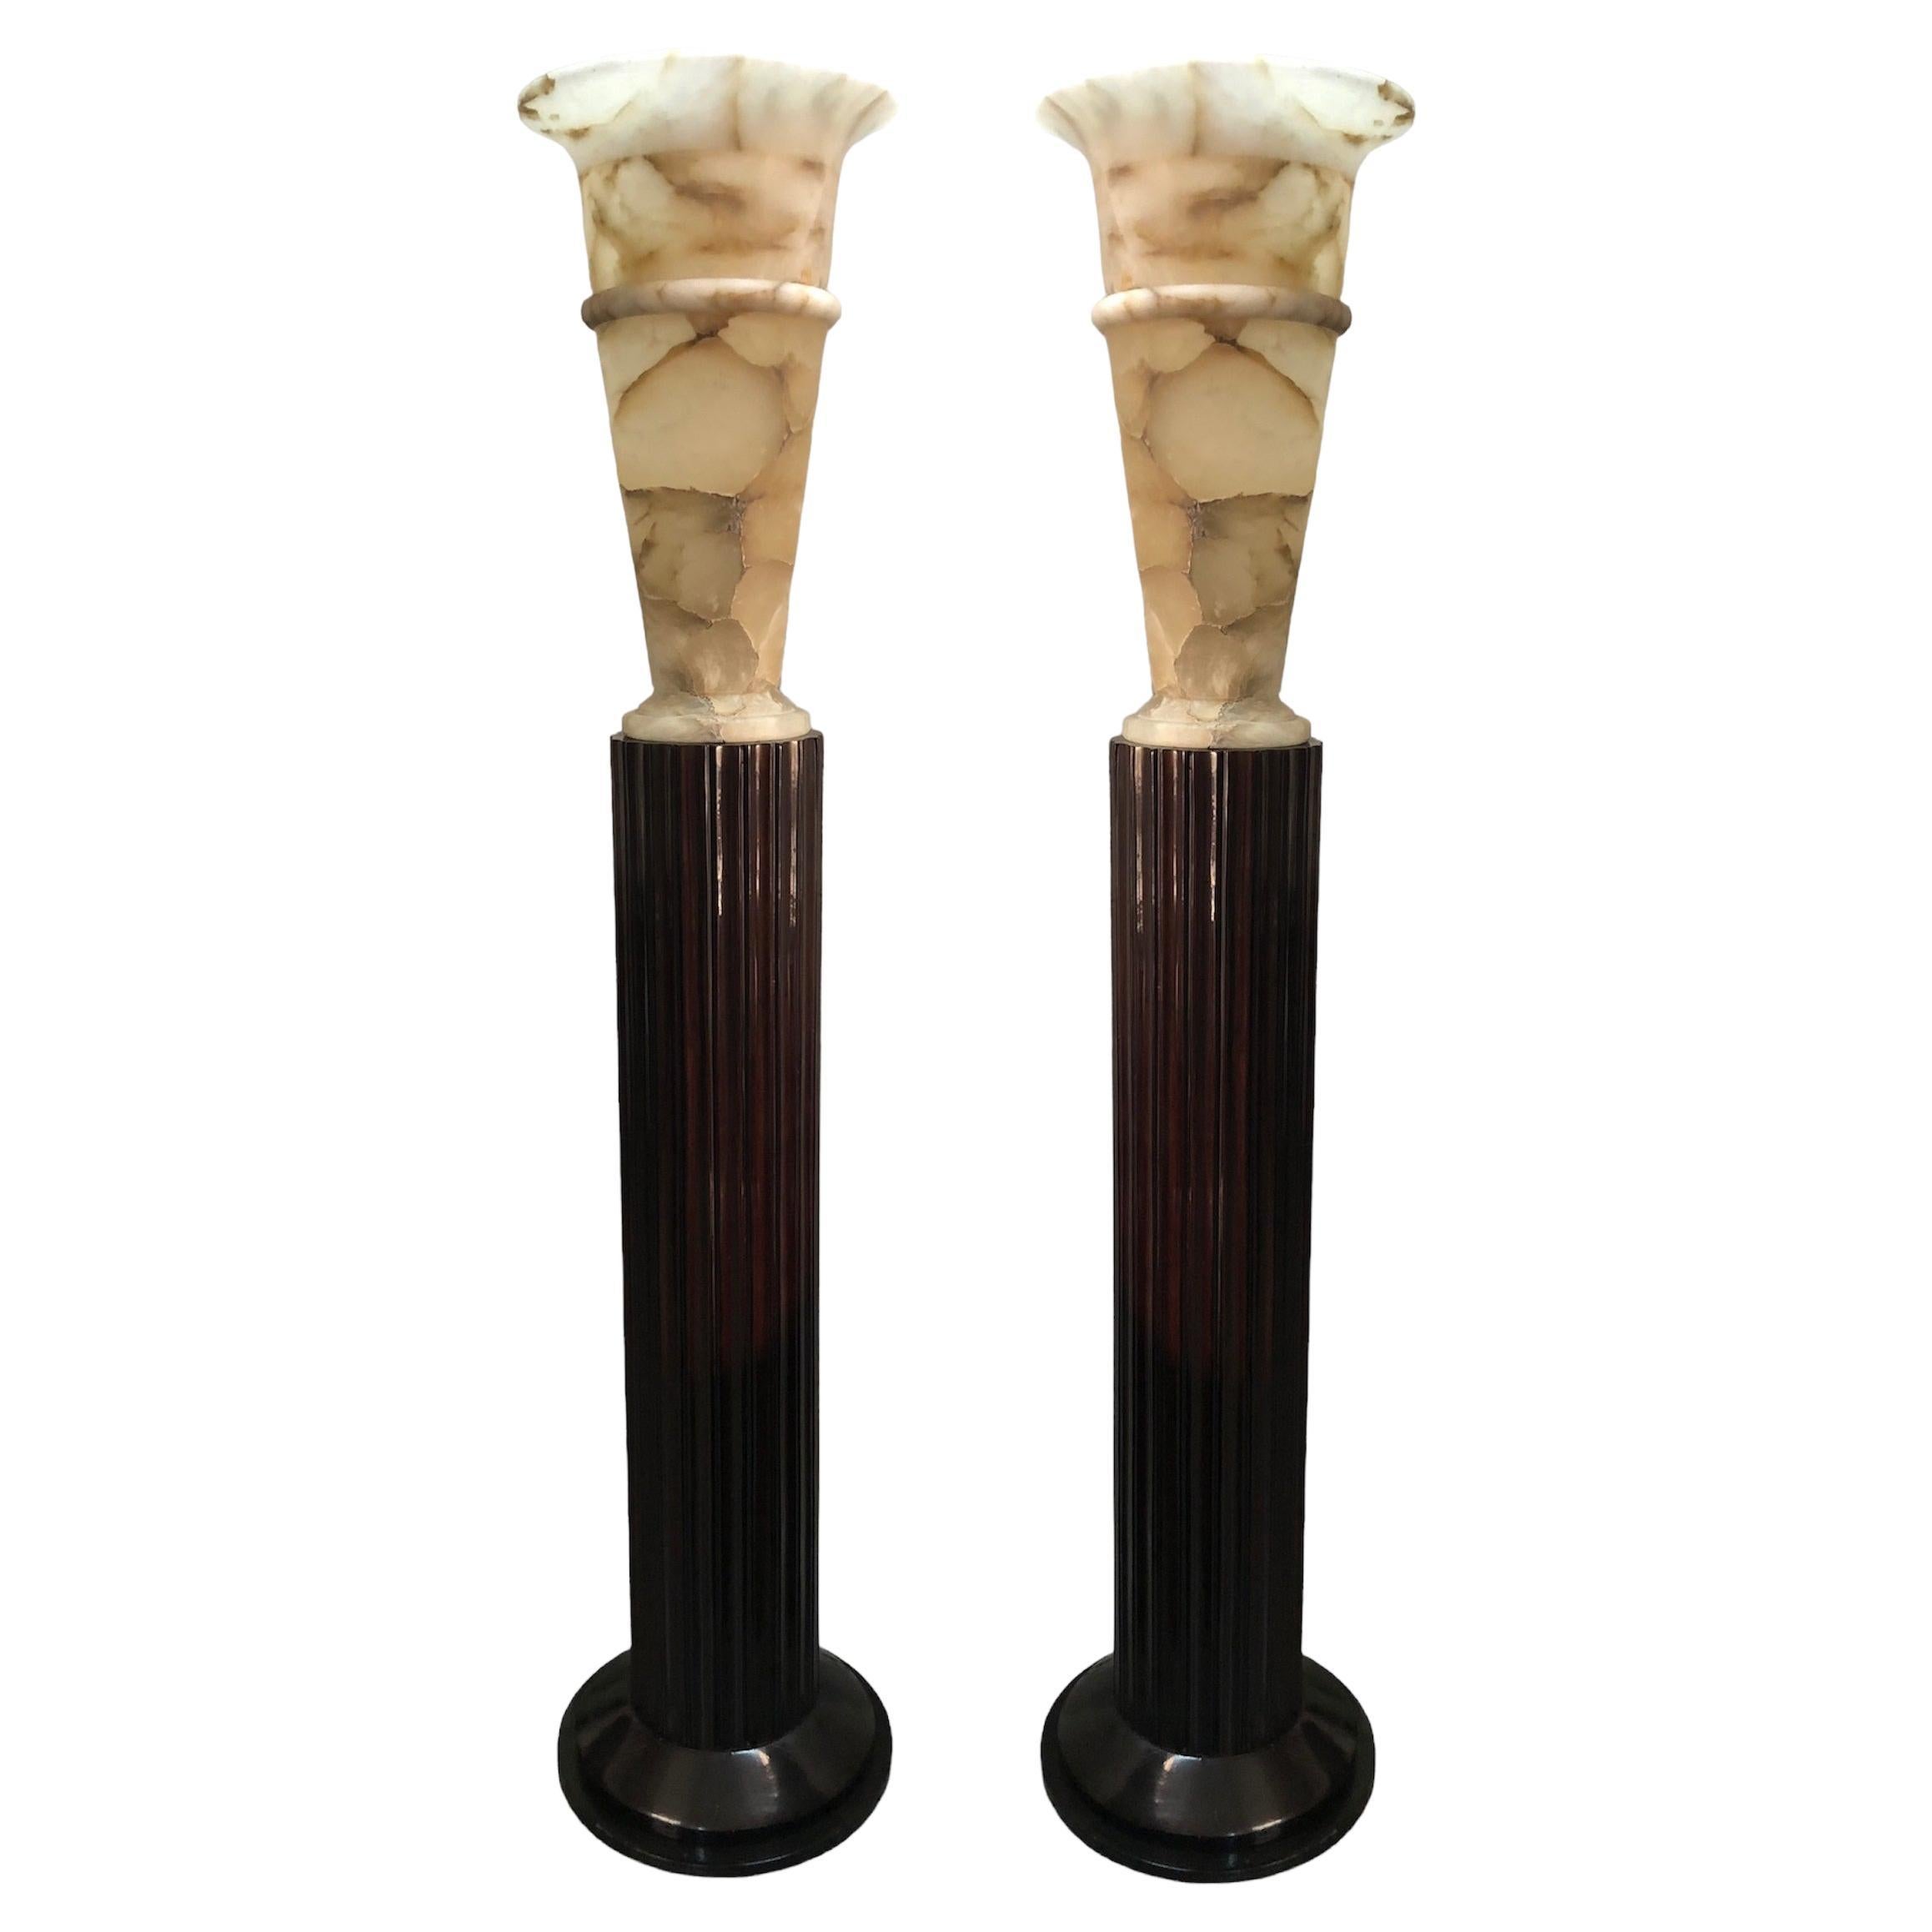 Pair of Art Deco Floor Lamps, France, Materials: Wood and Alabaster, 1930